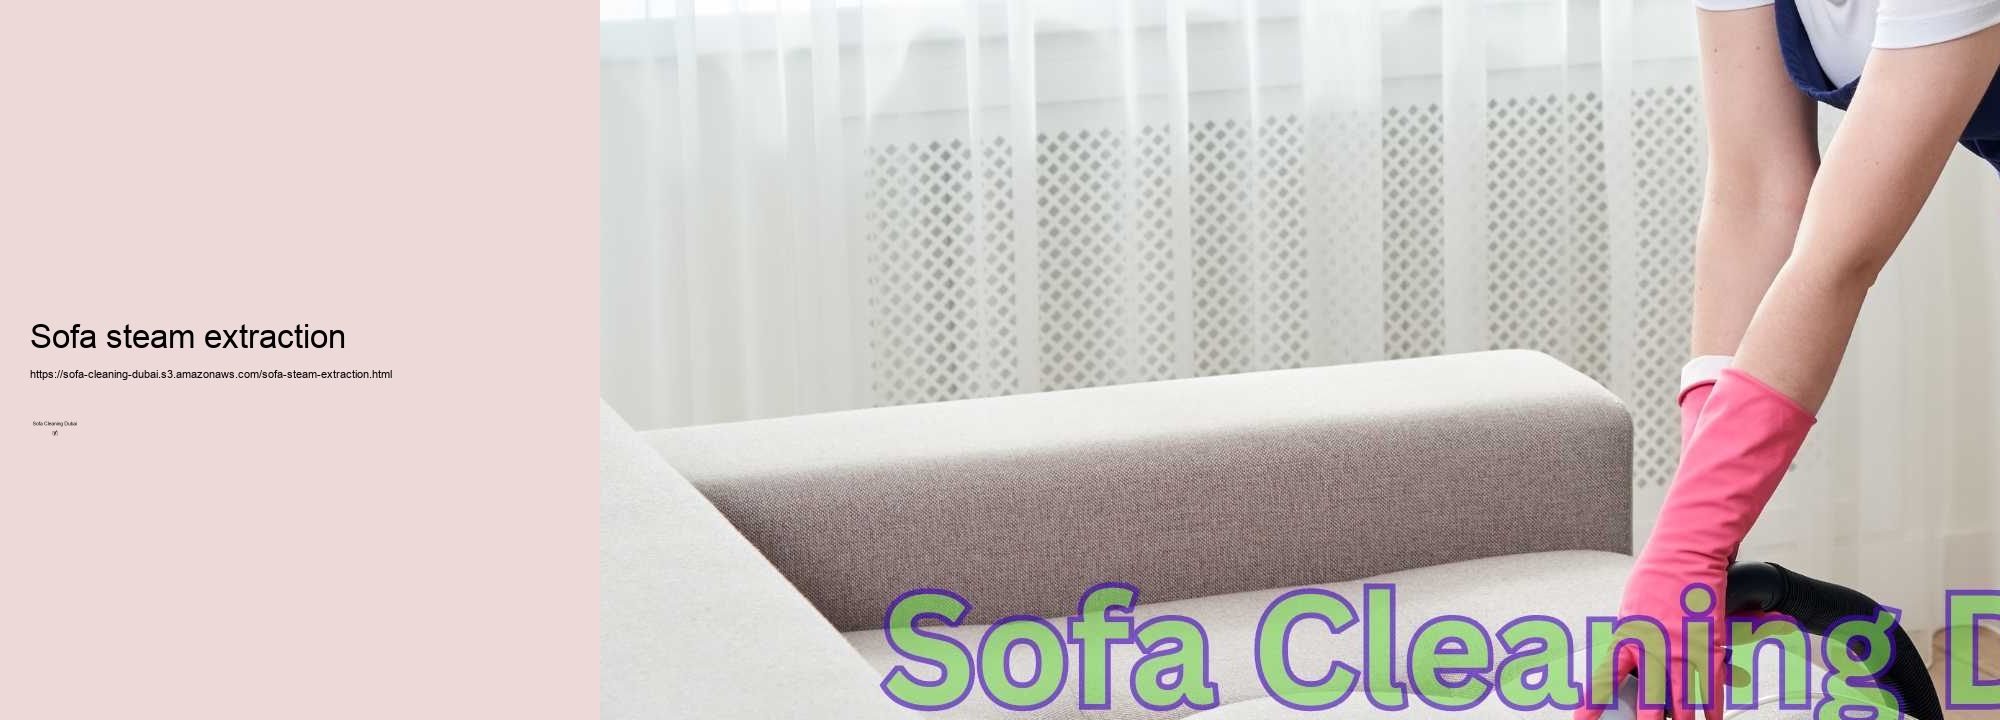 Sofa steam extraction